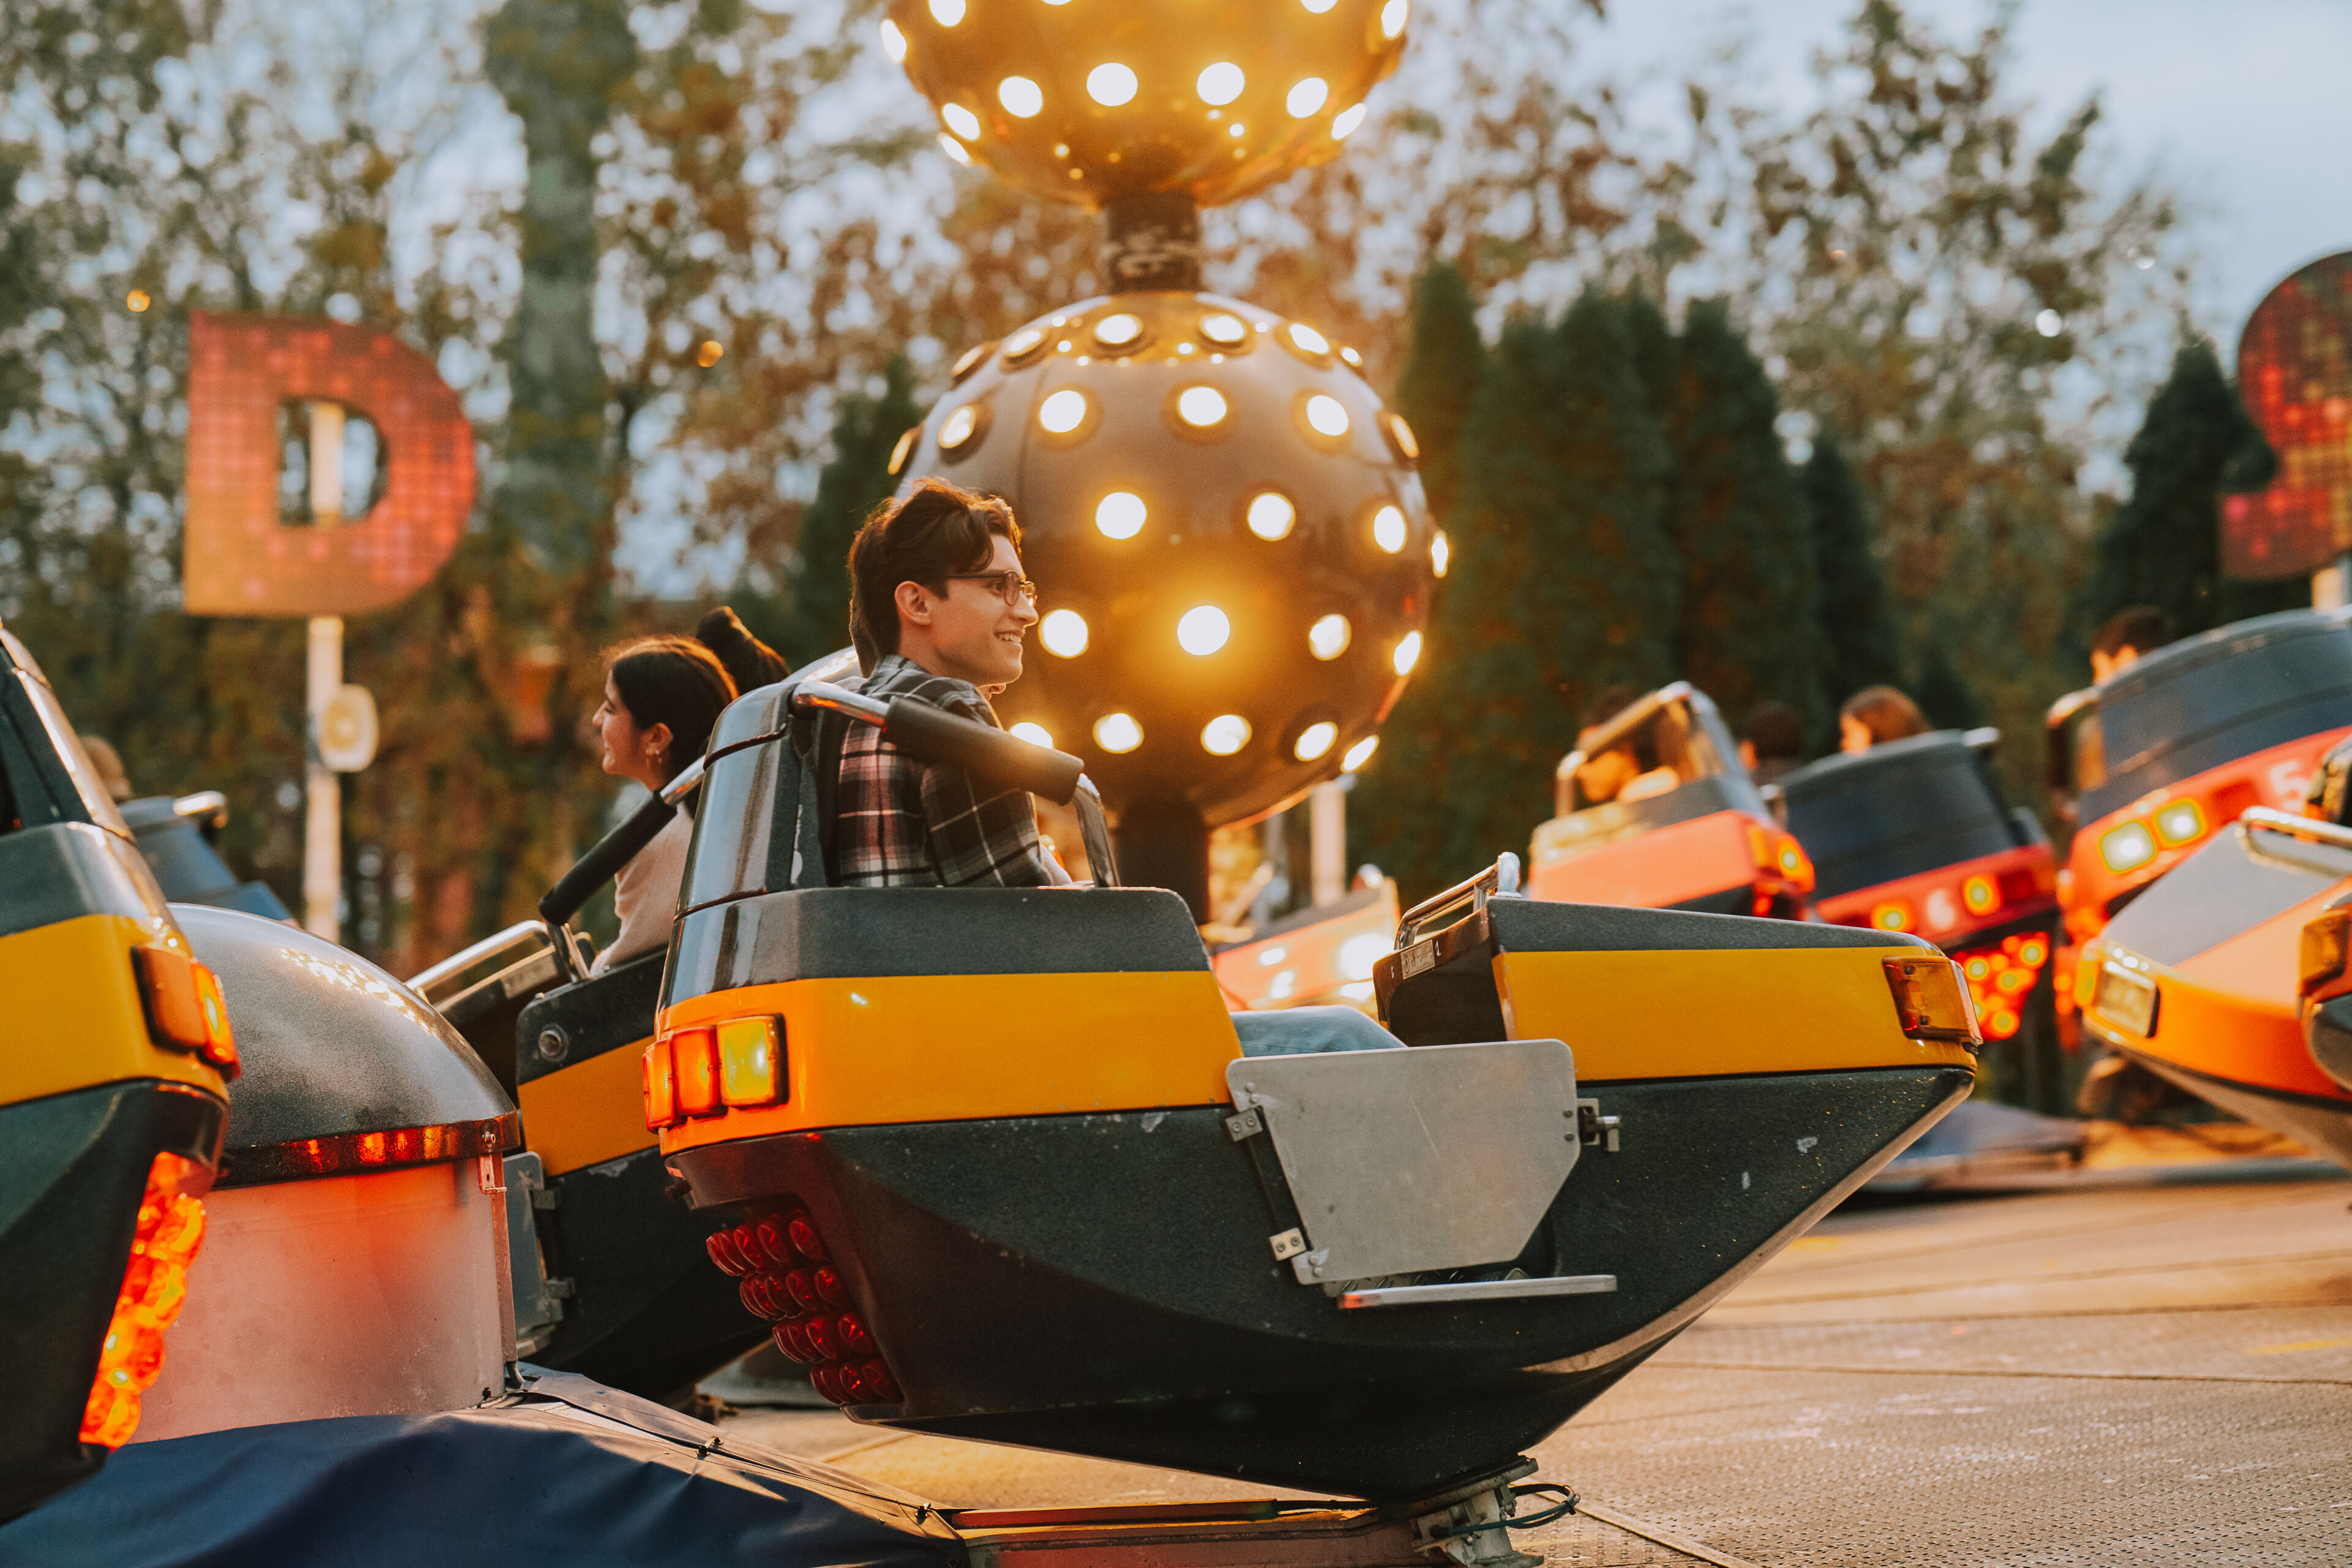 Joyful moments captured on bumper cars at dusk, with glowing lights and laughter in the air.